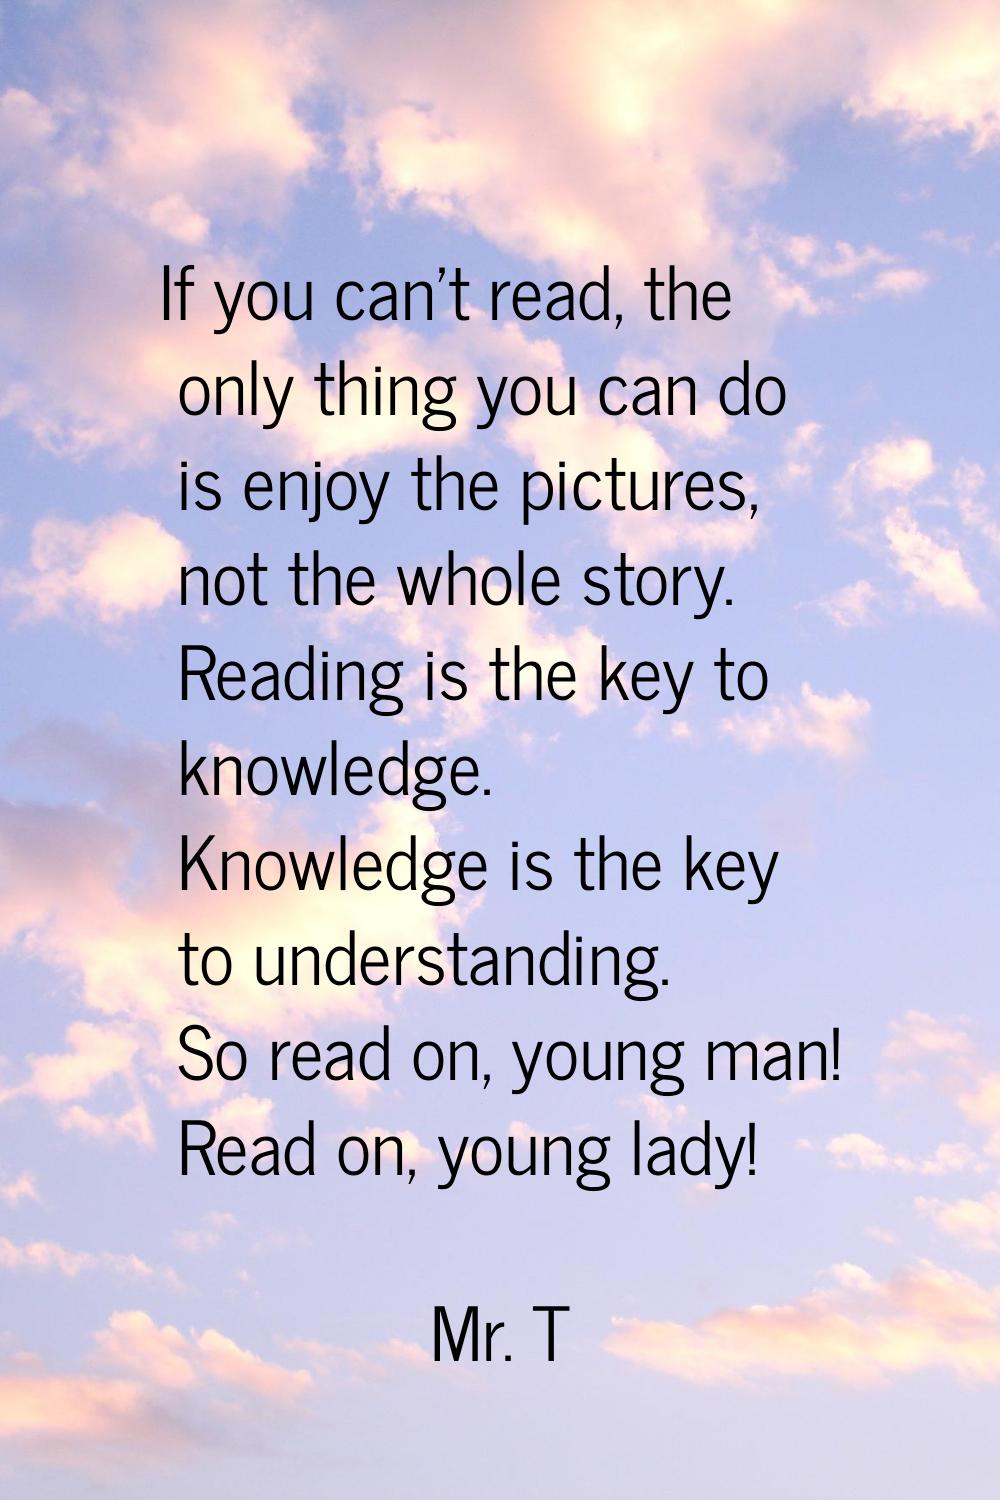 If you can't read, the only thing you can do is enjoy the pictures, not the whole story. Reading is